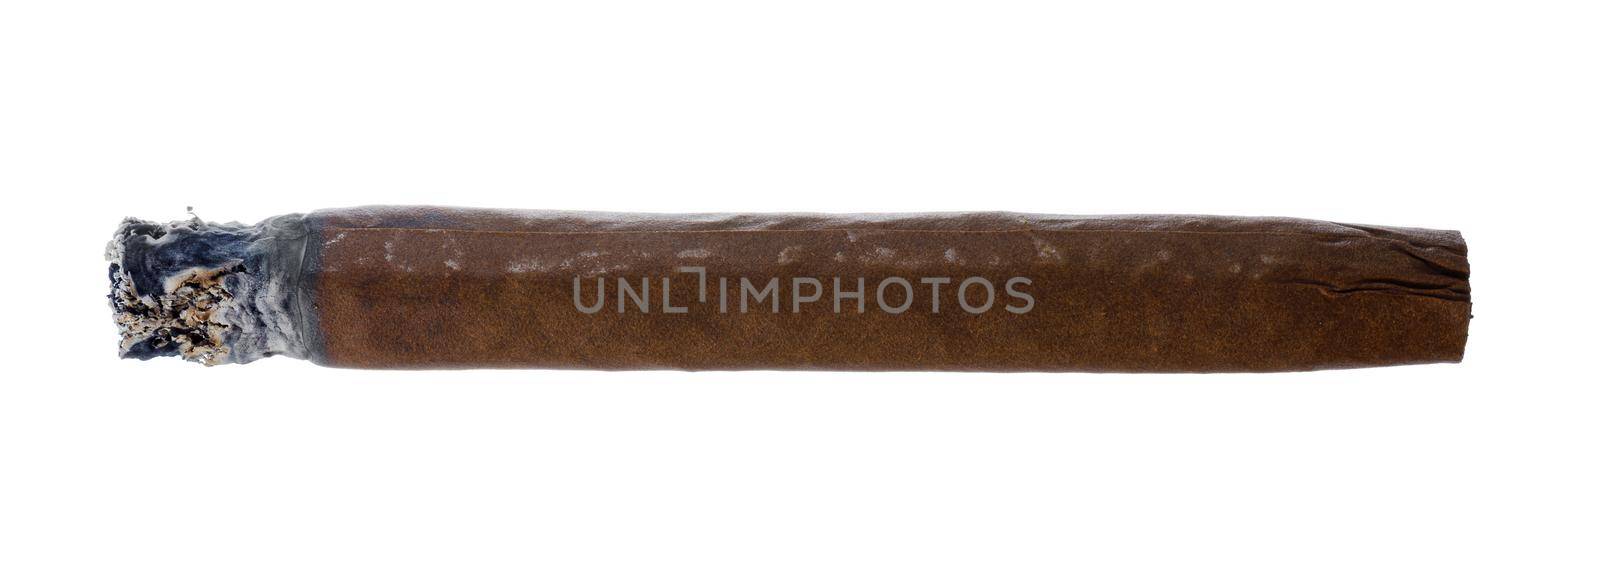 Burning hand rolled cigar isolated on white by Fabrikasimf